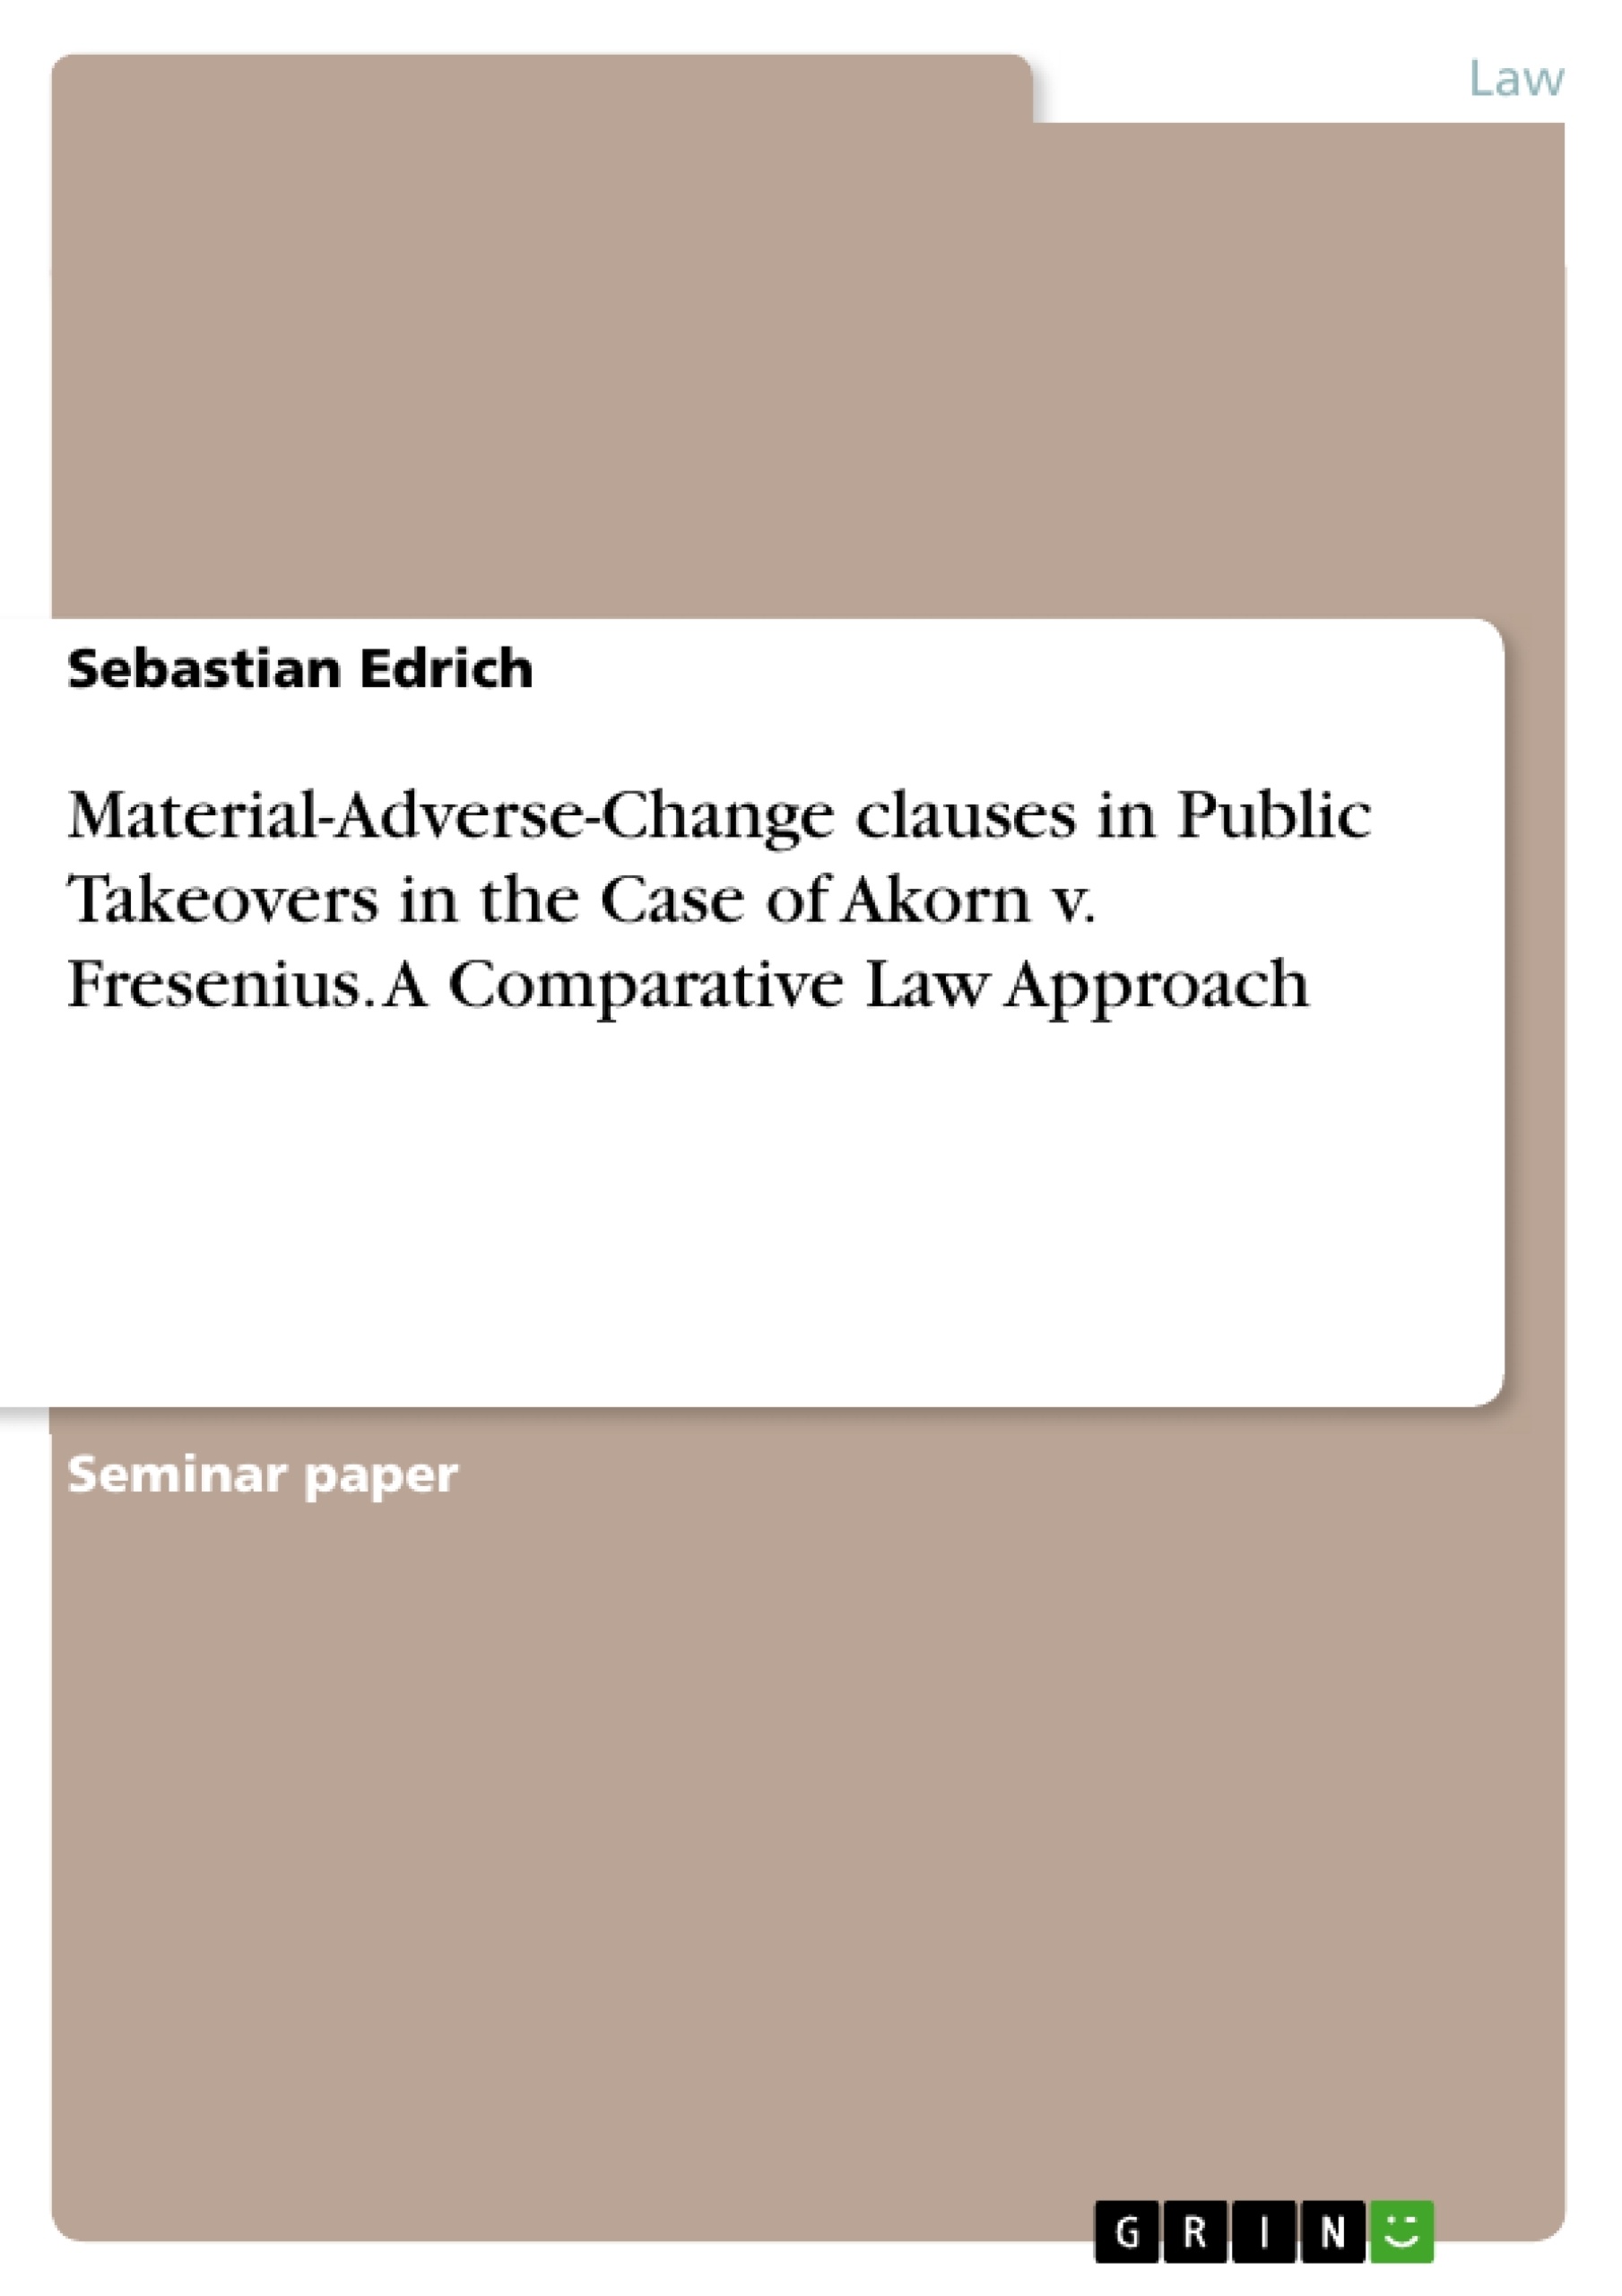 Titre: Material-Adverse-Change clauses in Public Takeovers in the Case of Akorn v. Fresenius. A Comparative Law Approach